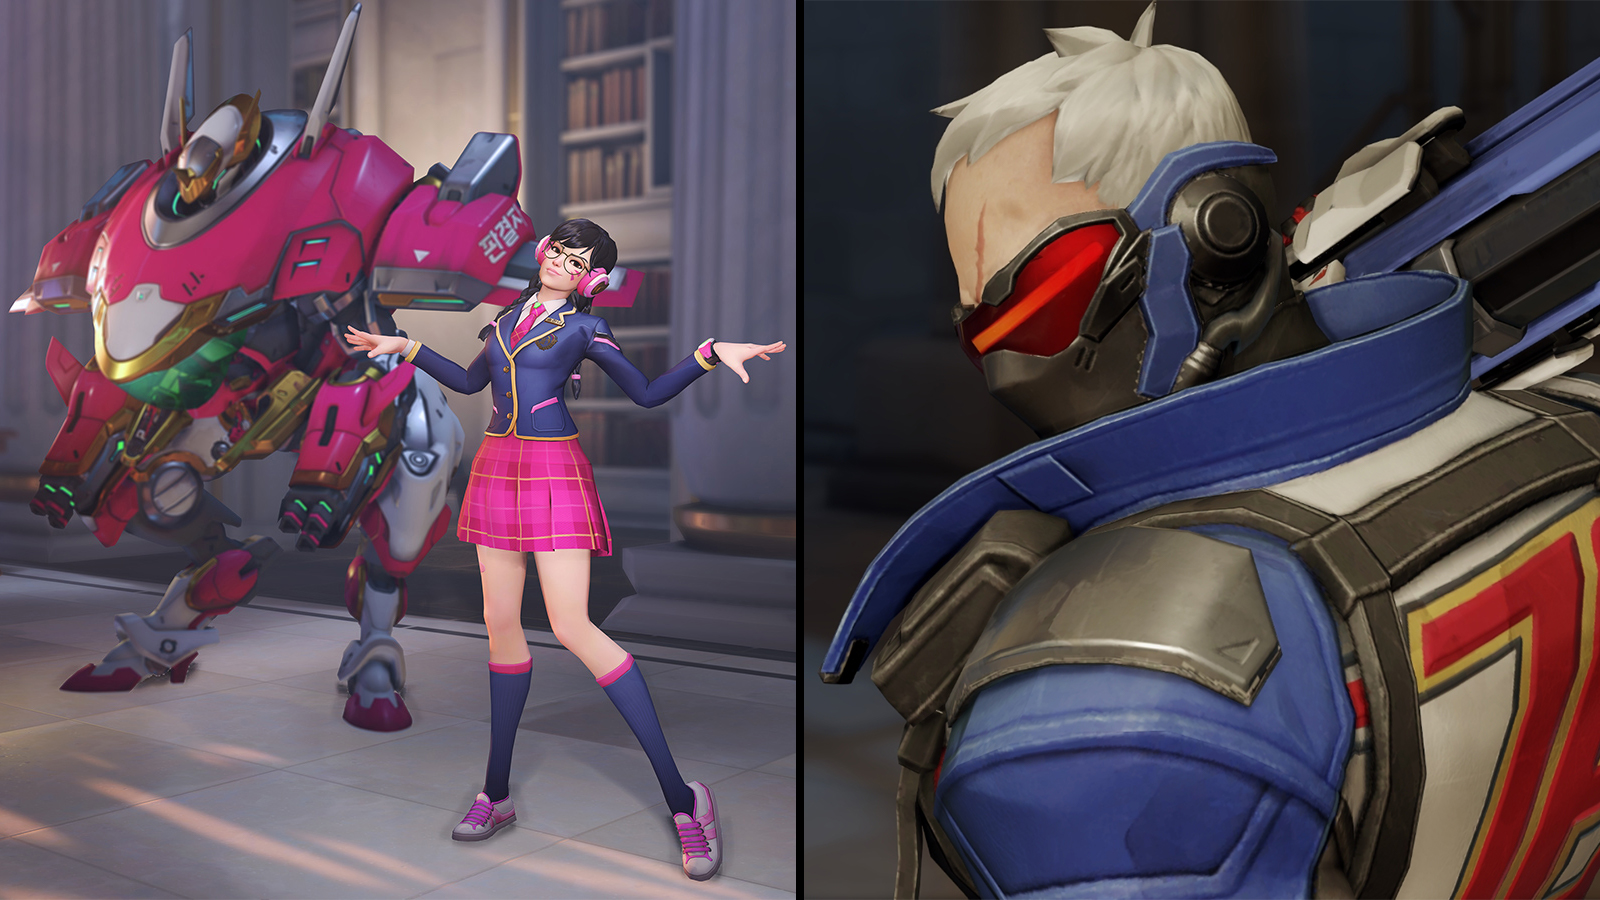 Dva and soldier 76